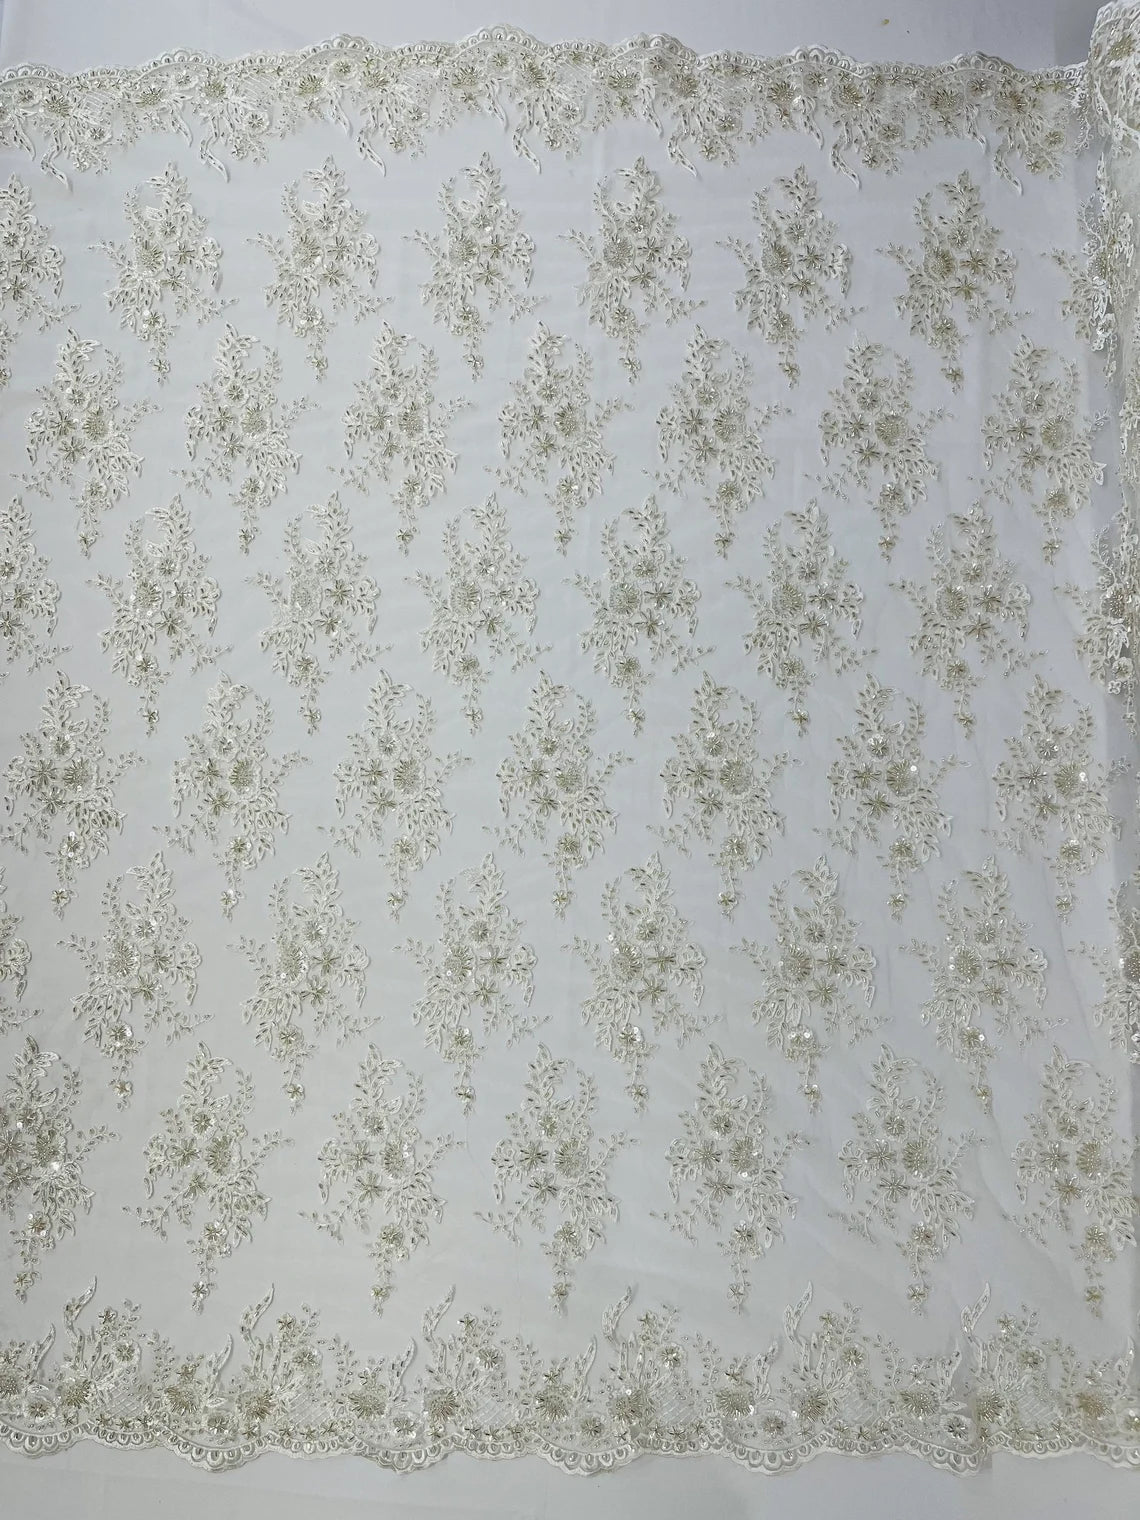 Floral Leaf Bead Sequins Fabric - Ivory - Embroidered Flower and Leaves Design Fabric By Yard